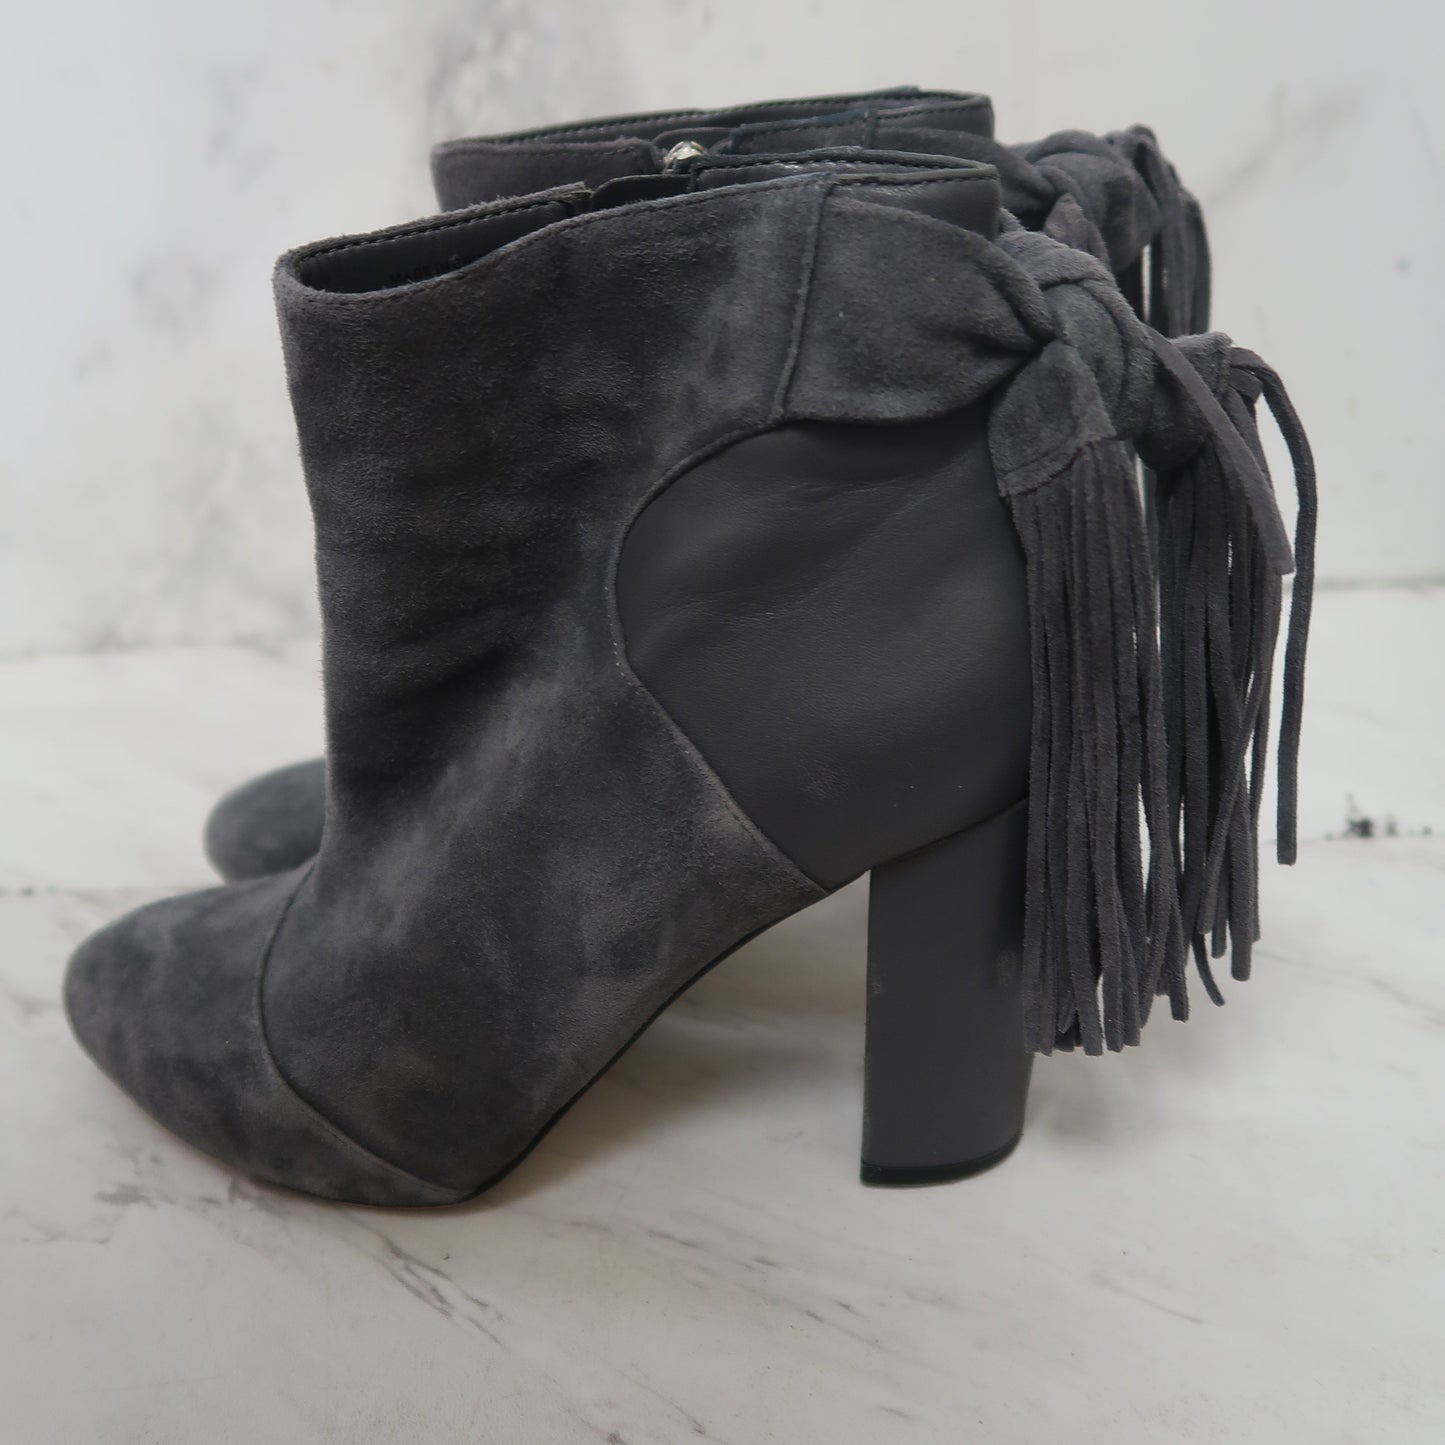 Boots Ankle Heels By White House Black Market  Size: 7.5